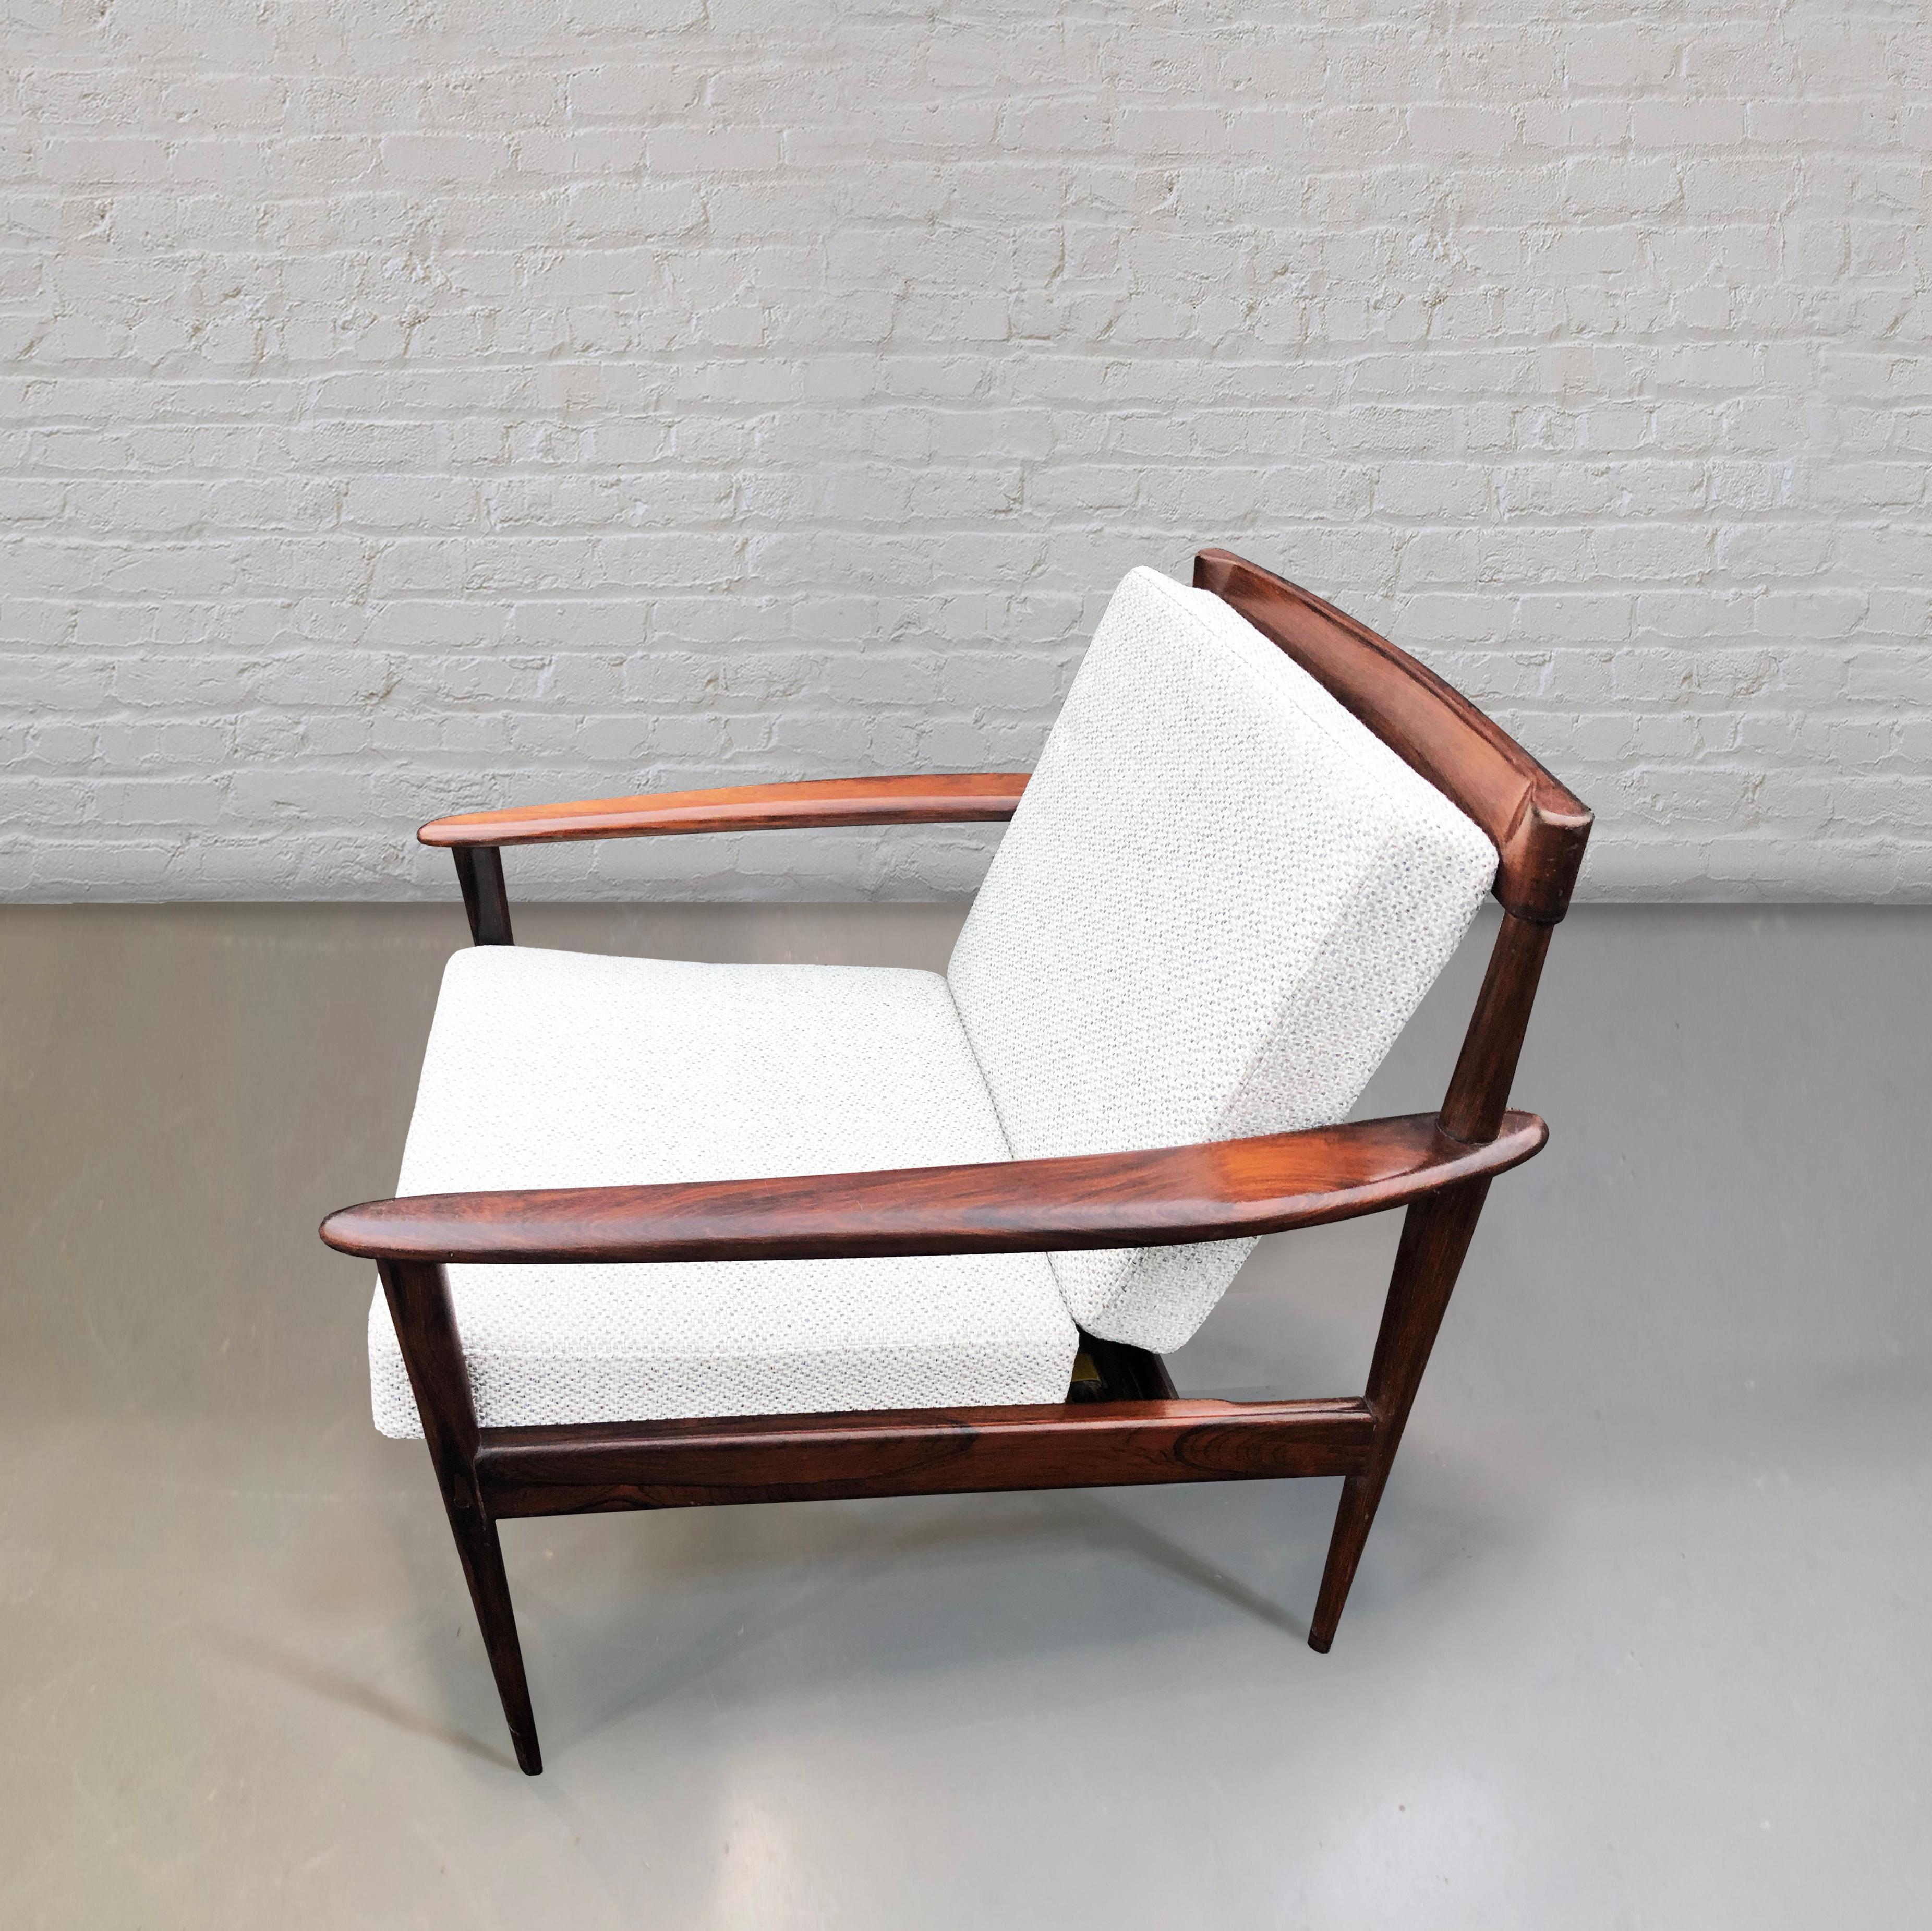 Solid wood armchair and ottoman, by Rino Levi. 
Brazil, 1960s
Manufactured by Móveis Ambiente. 

A perfectly balanced armchair, masterly executed. Stunning minimal back rest made of four sleek solid wood  slats.
The fluid tapered legs and slim